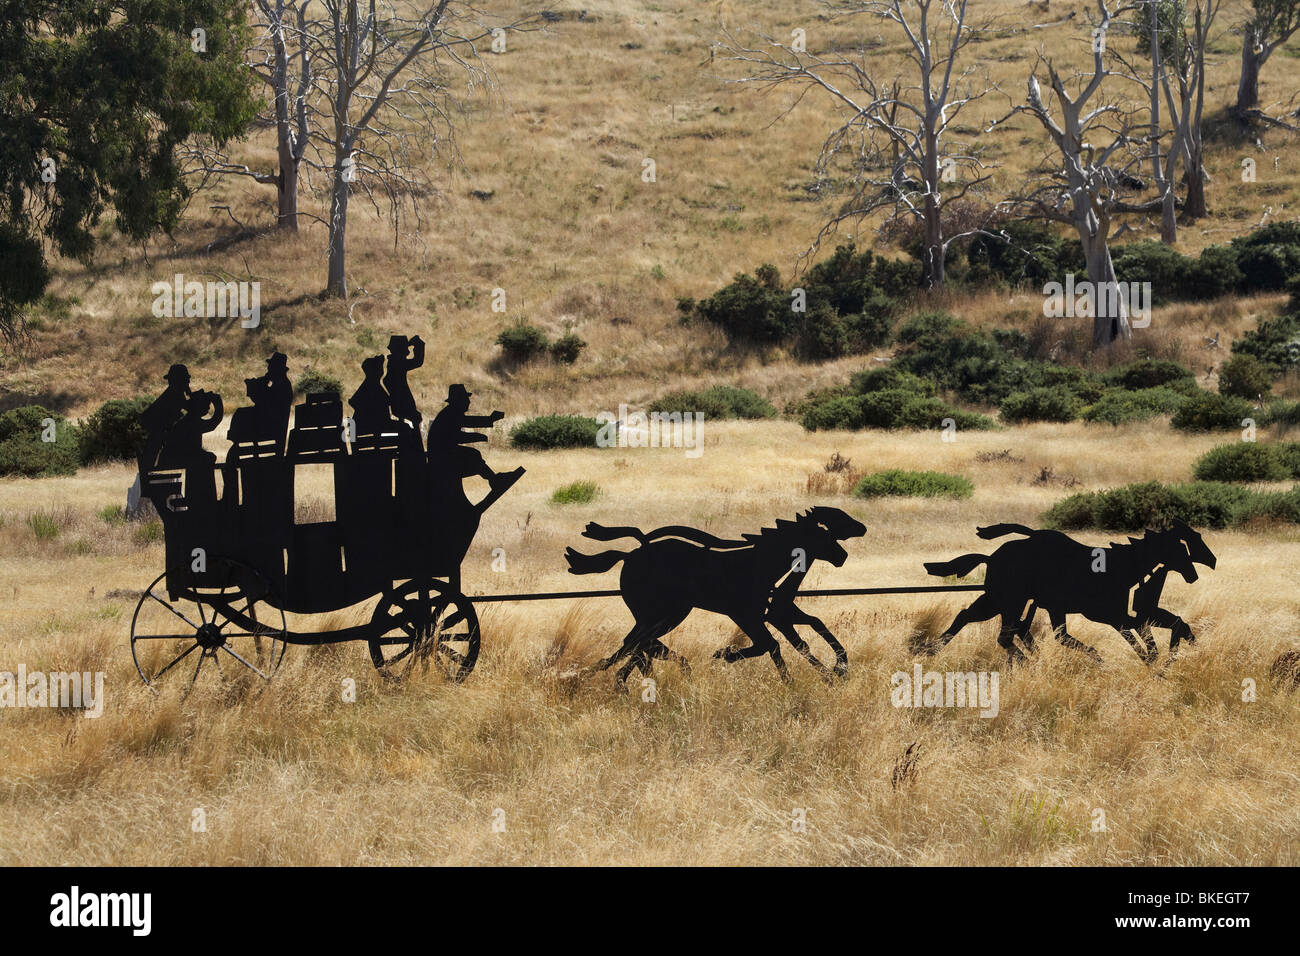 Coach and Horses Silhouette Sculpture, Heritage Highway, Midlands, Central Tasmania, Australia Stock Photo